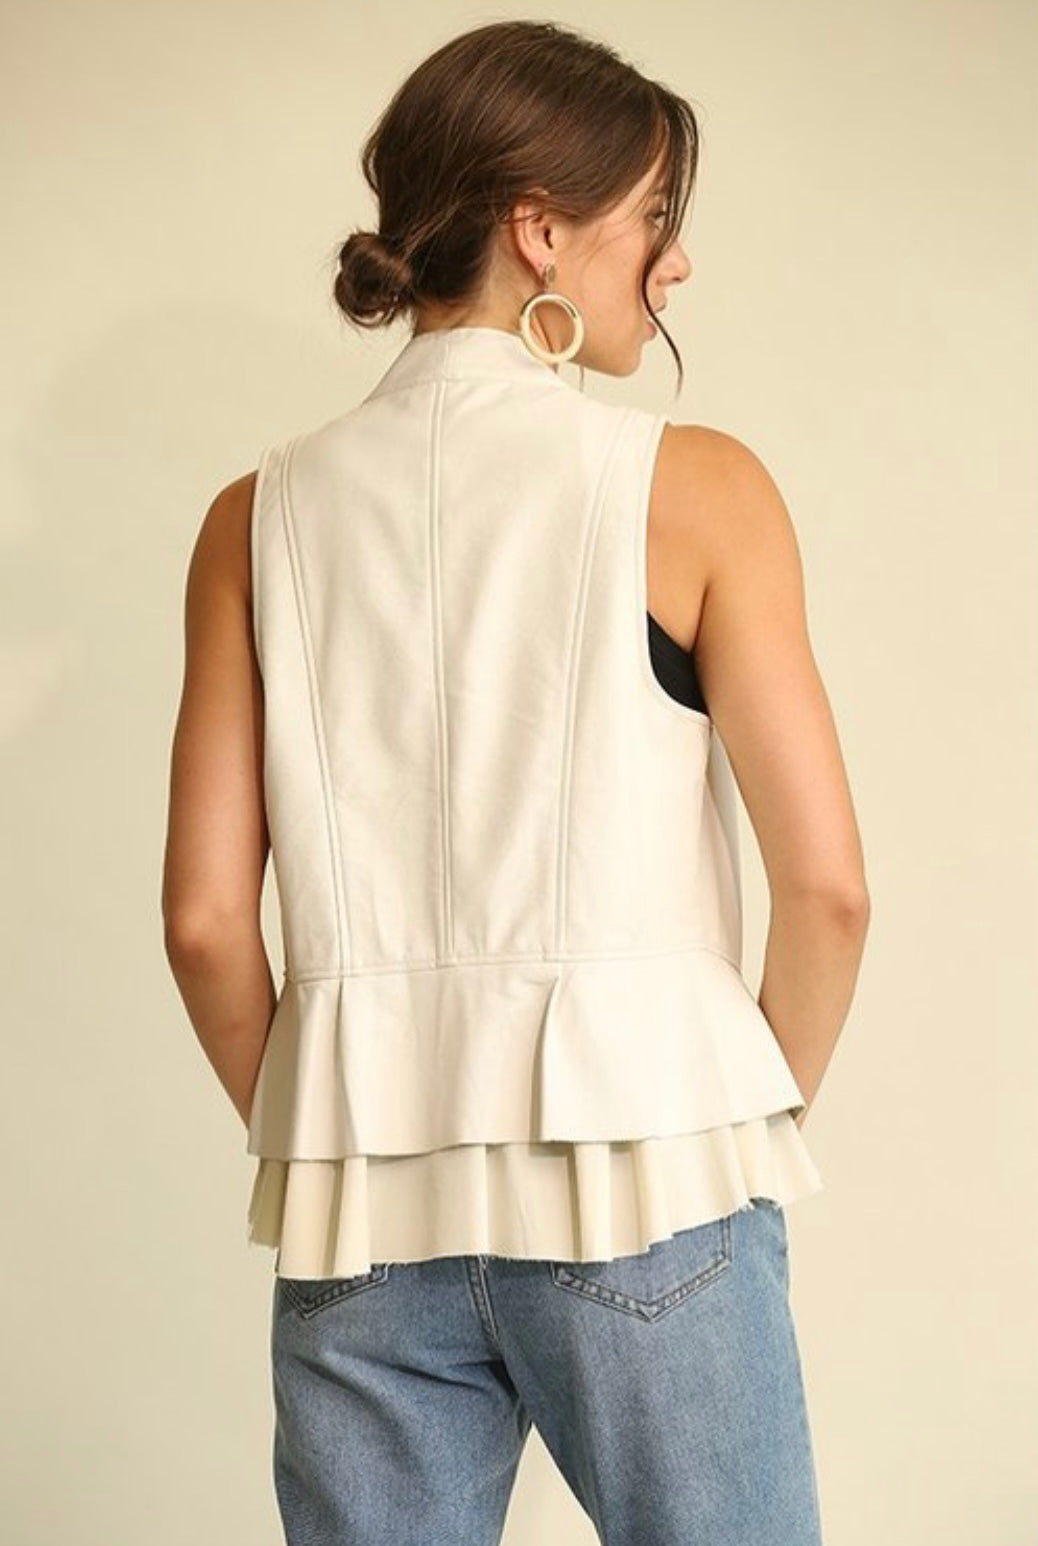 Liza Faux Leather Vest - Corinne Boutique Family Owned and Operated USA